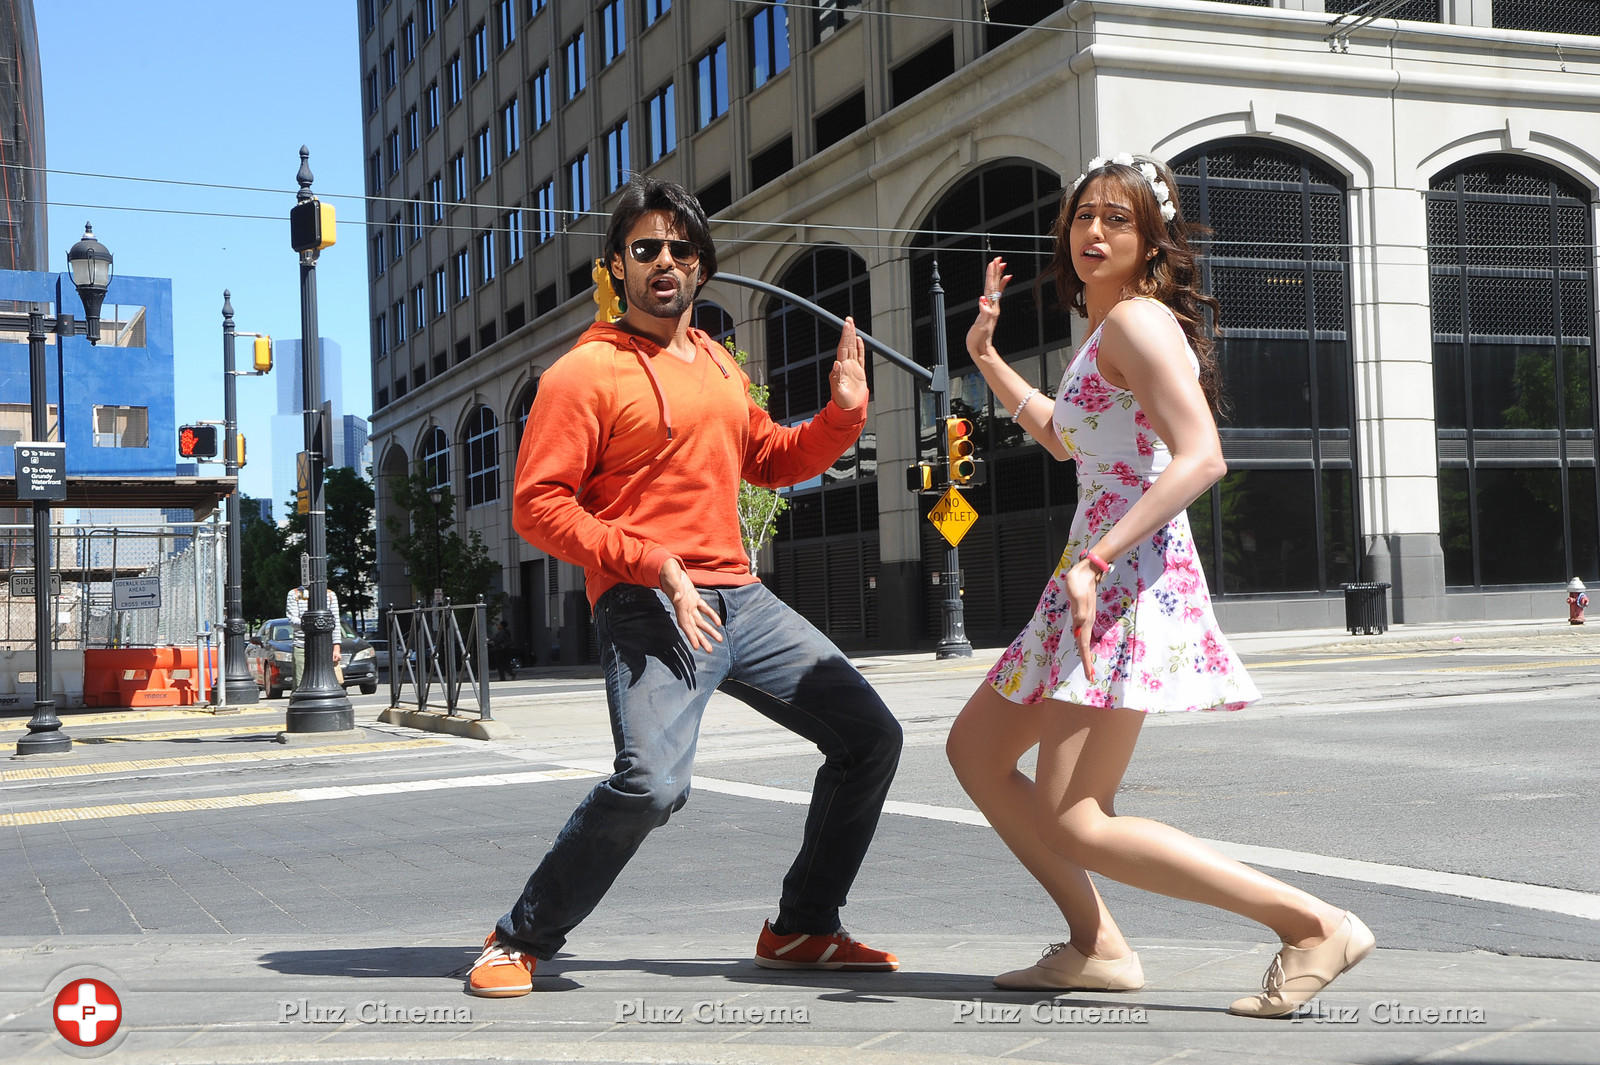 Subrahmanyam For Sale Movie New Stills | Picture 1114150